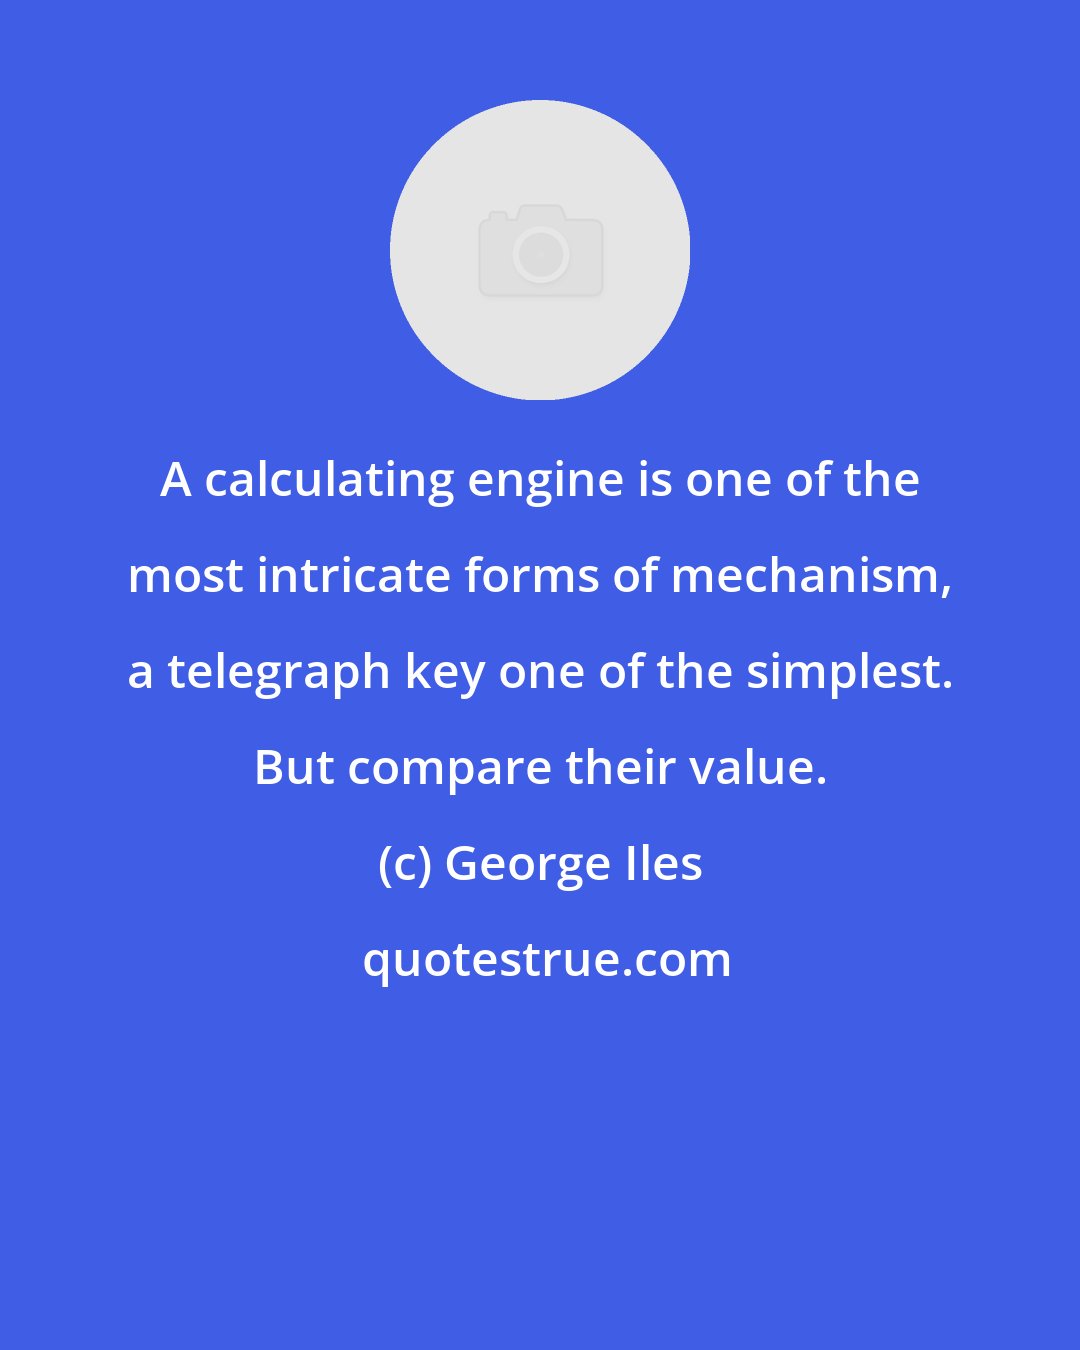 George Iles: A calculating engine is one of the most intricate forms of mechanism, a telegraph key one of the simplest. But compare their value.